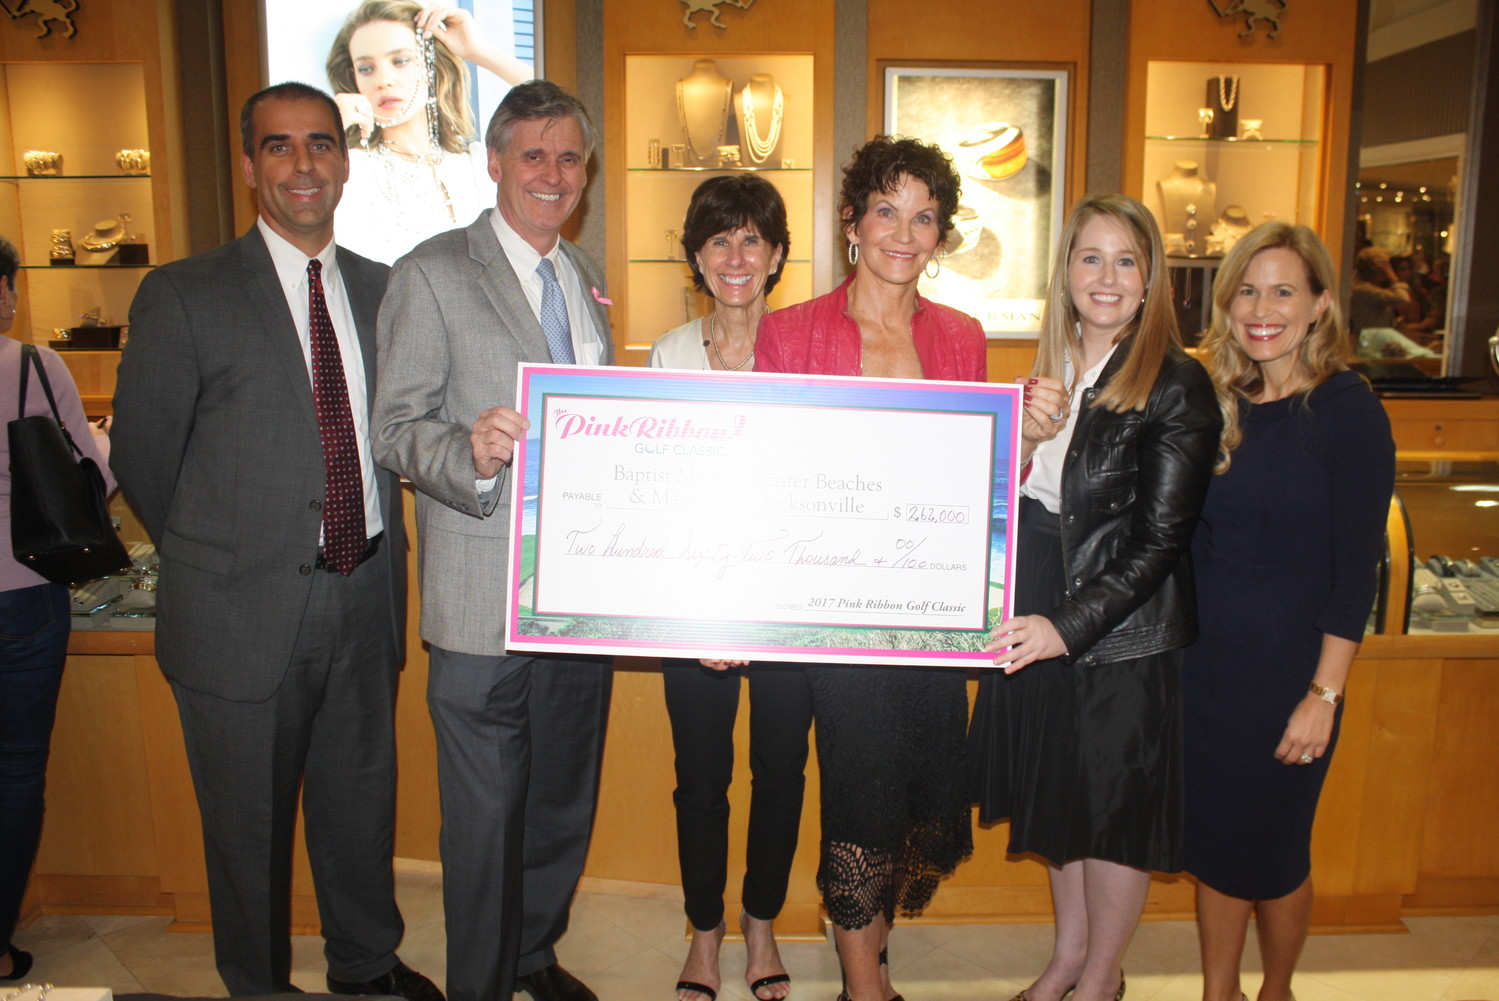 Dr. Ryan Makar and Joe Mitrick of Baptist Medical Center Beaches, Pink Ribbon Golf Classic co-chairs Joanne Ghiloni and Nancy Morrison and Jackie Joy and Dr. Dawn Mussallem of Mayo Clinic-Jacksonville display the check total of $262,000, a record amount raised by the Ponte Vedra fundraiser.